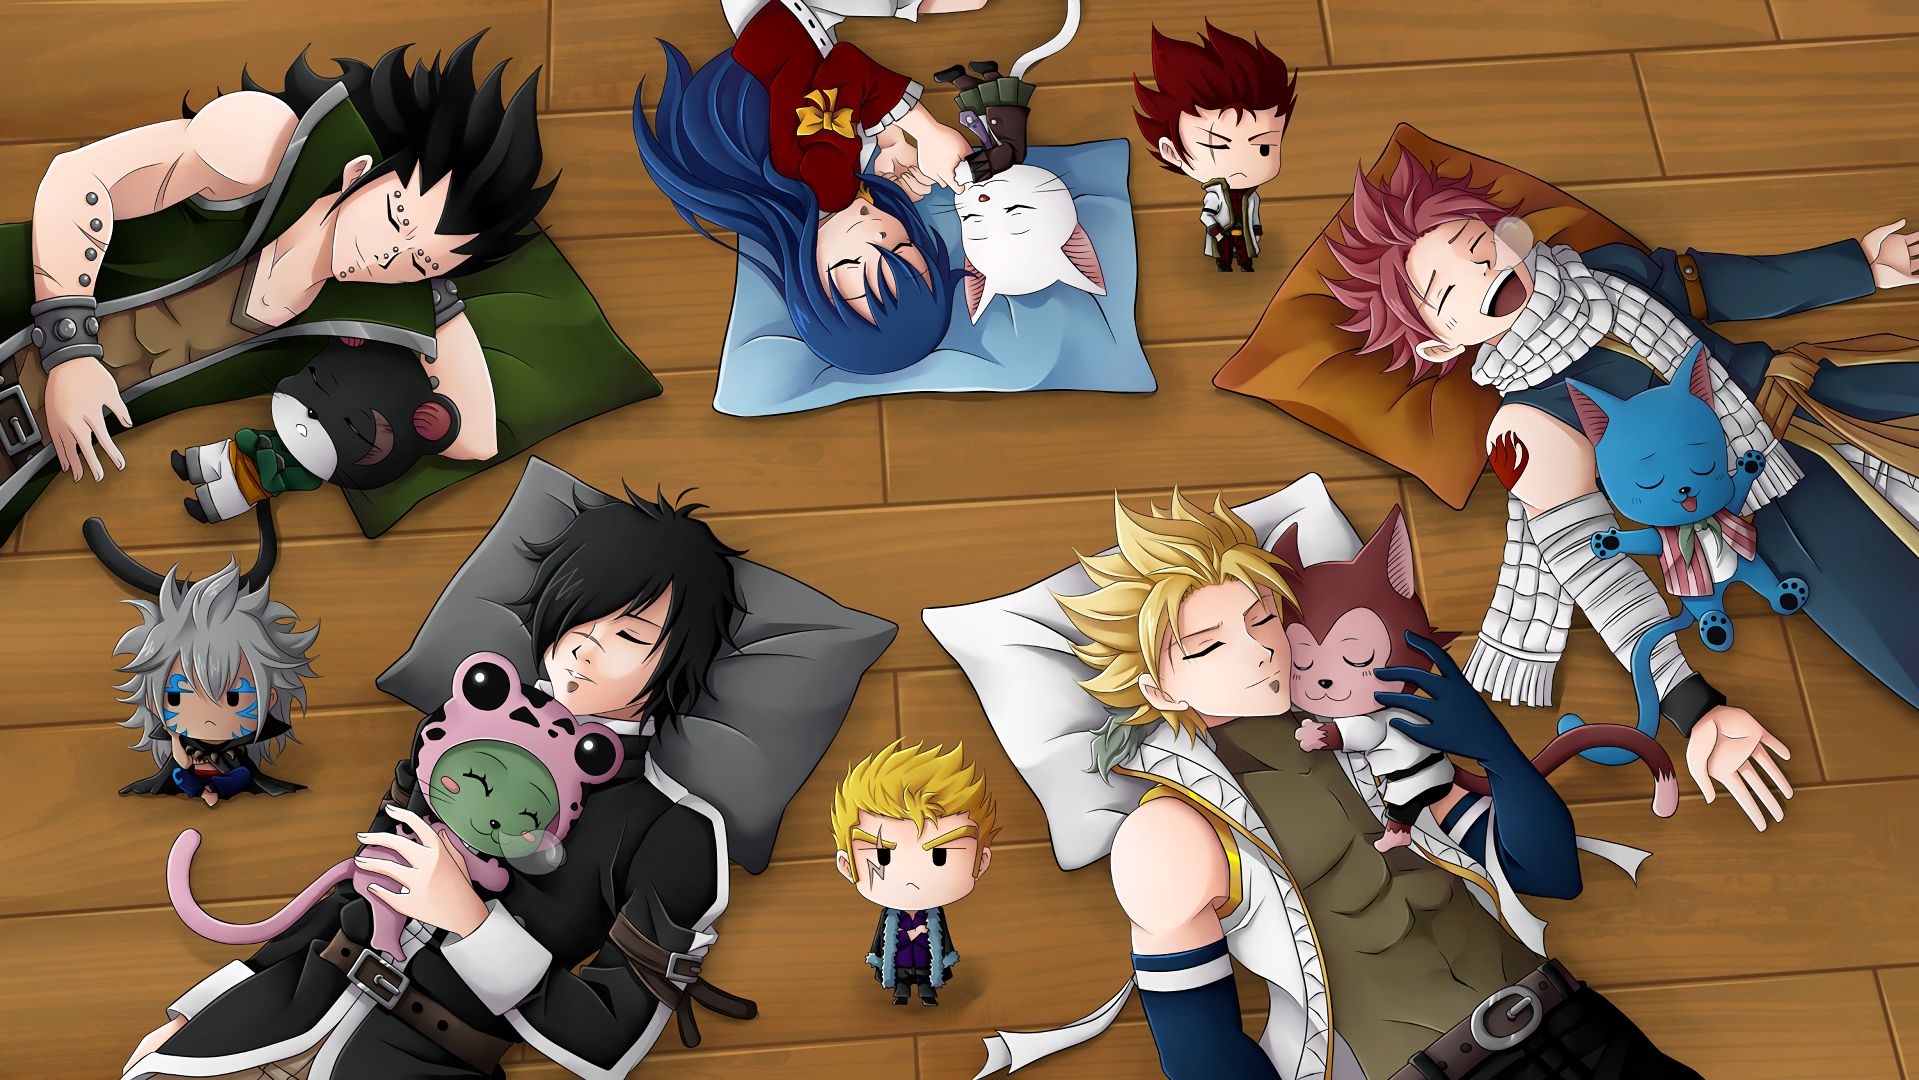 Charles Fairy Tail Frosch Fairy Tail Gajeel Redfox Happy Fairy Tail Laxus Dreyar Lector Fairy Tail N 1919x1080